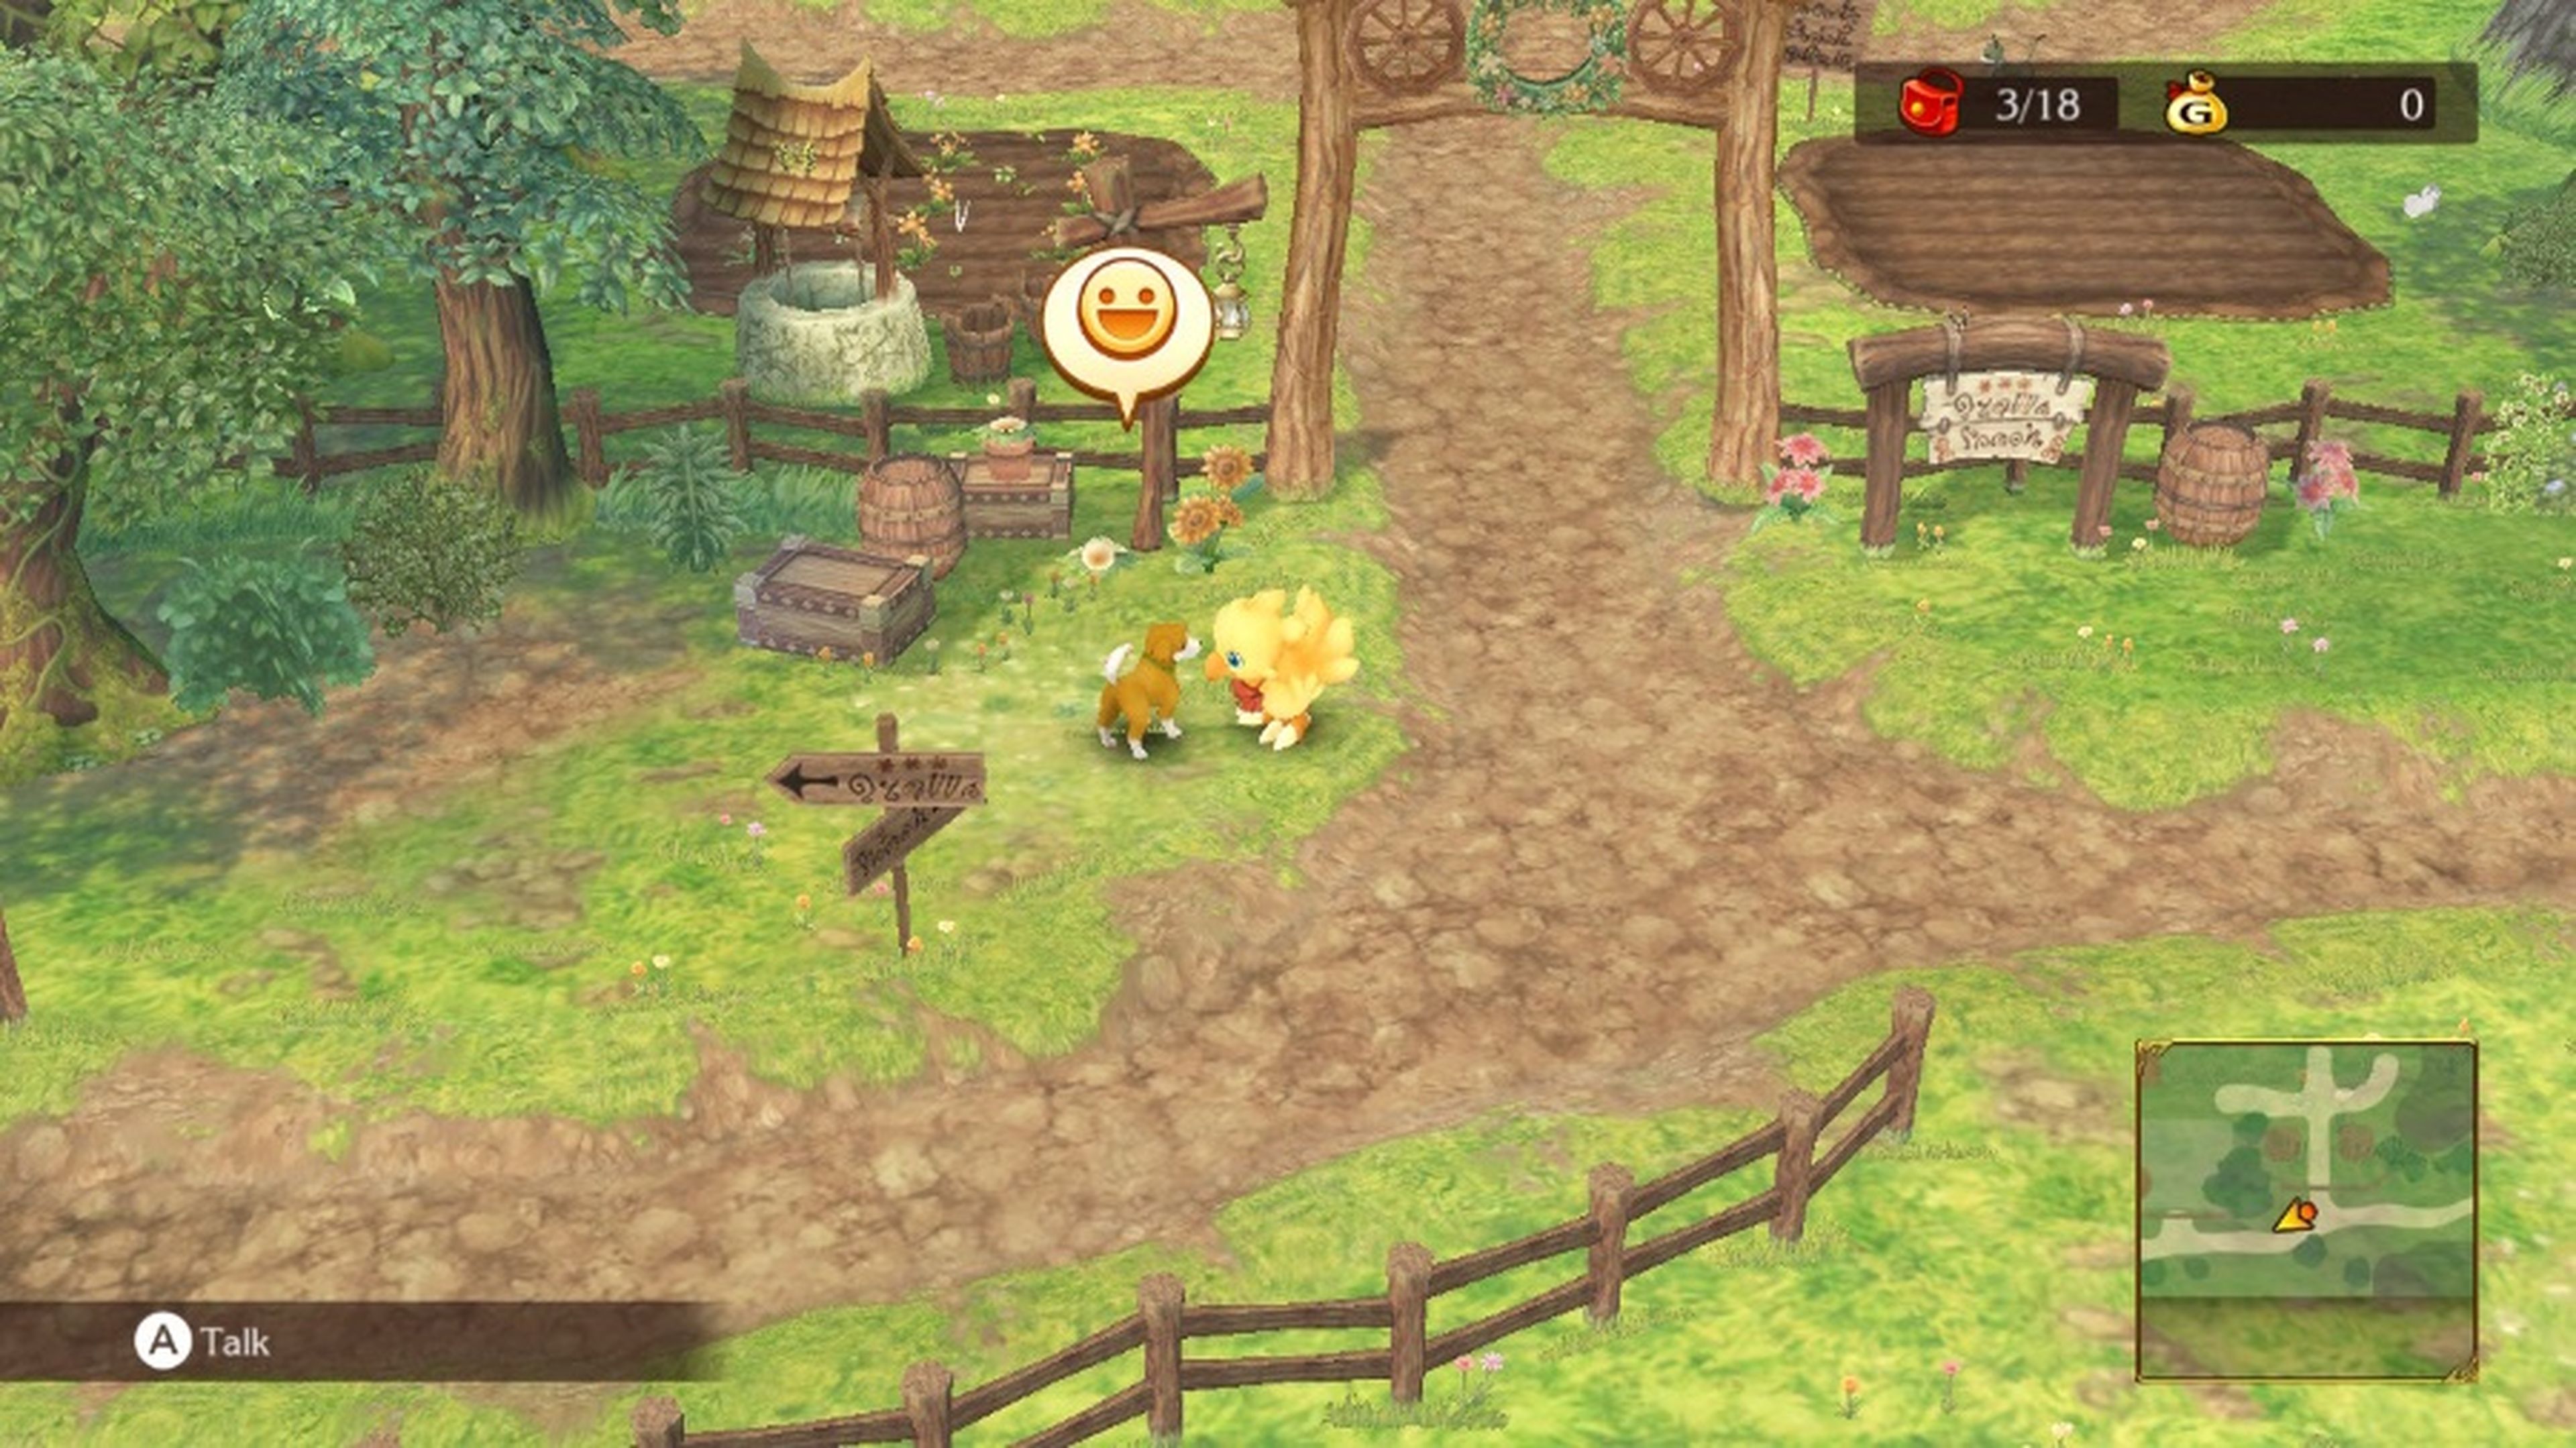 You can not pet the dog in Chocobo's Mystery Dungeon EVERY BUDDY!